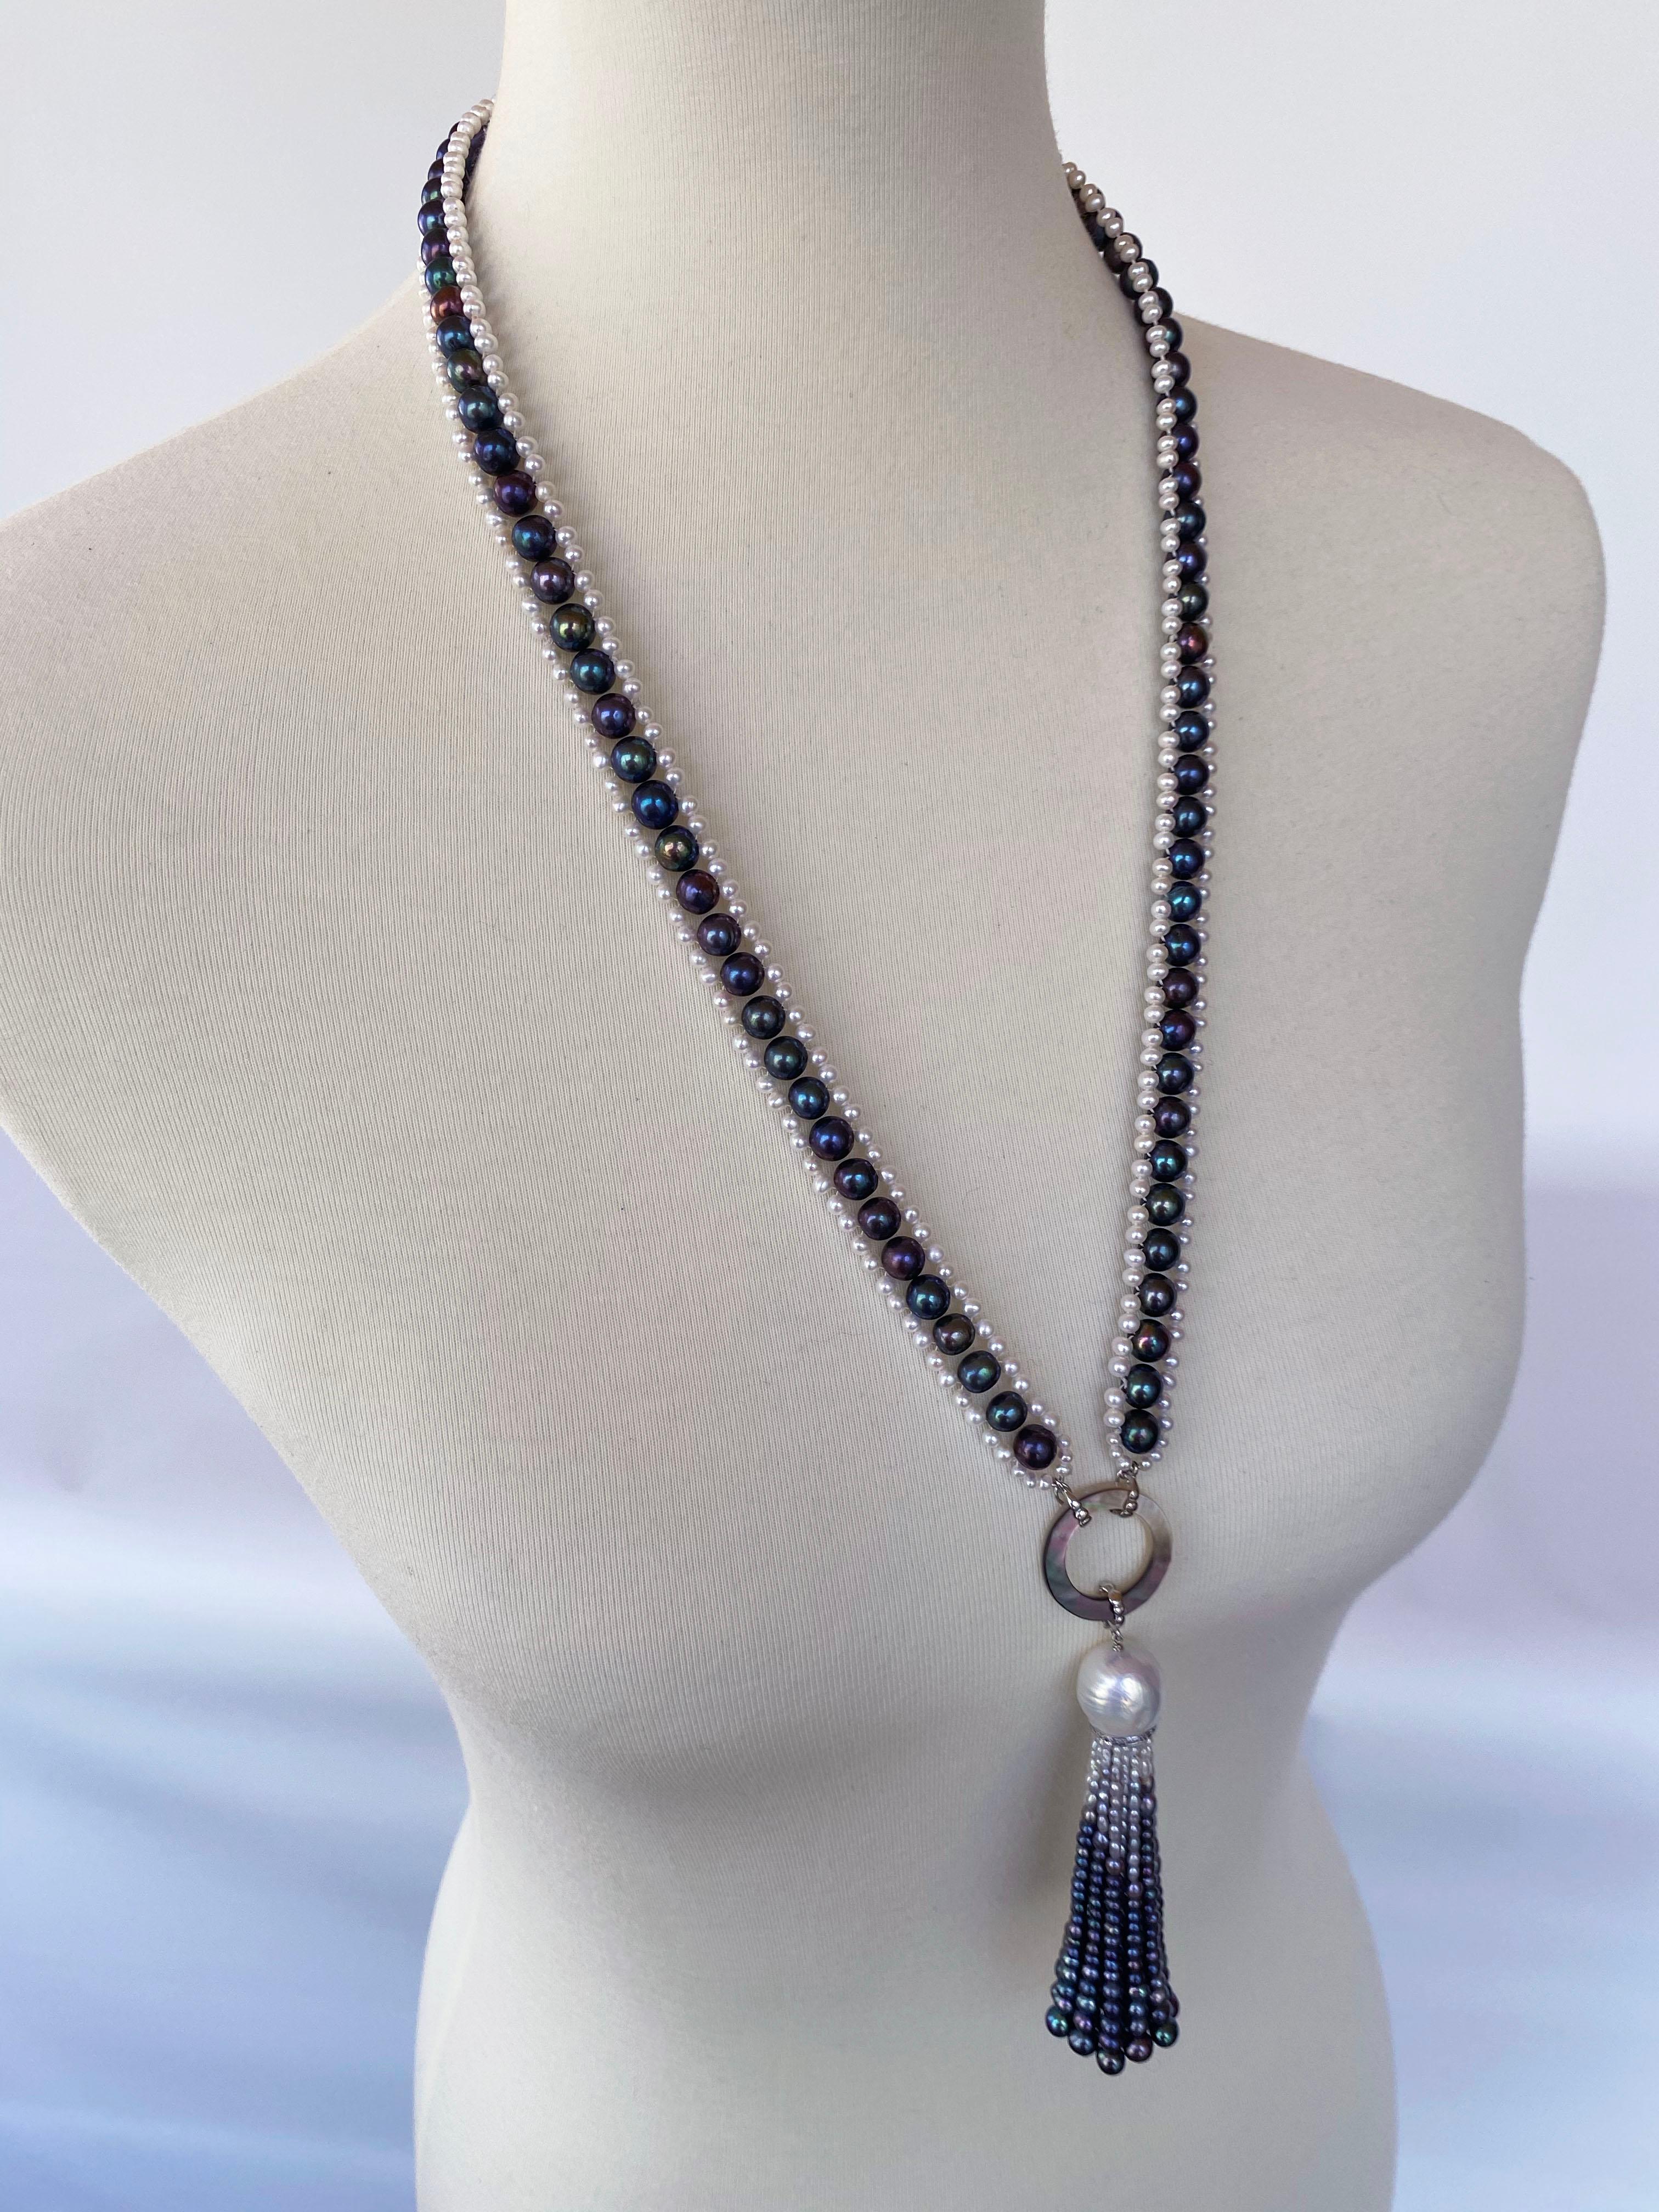 Artisan Marina J. Black and White Woven Pearl Sautoir with Abalone Shell & Ombre Tassel